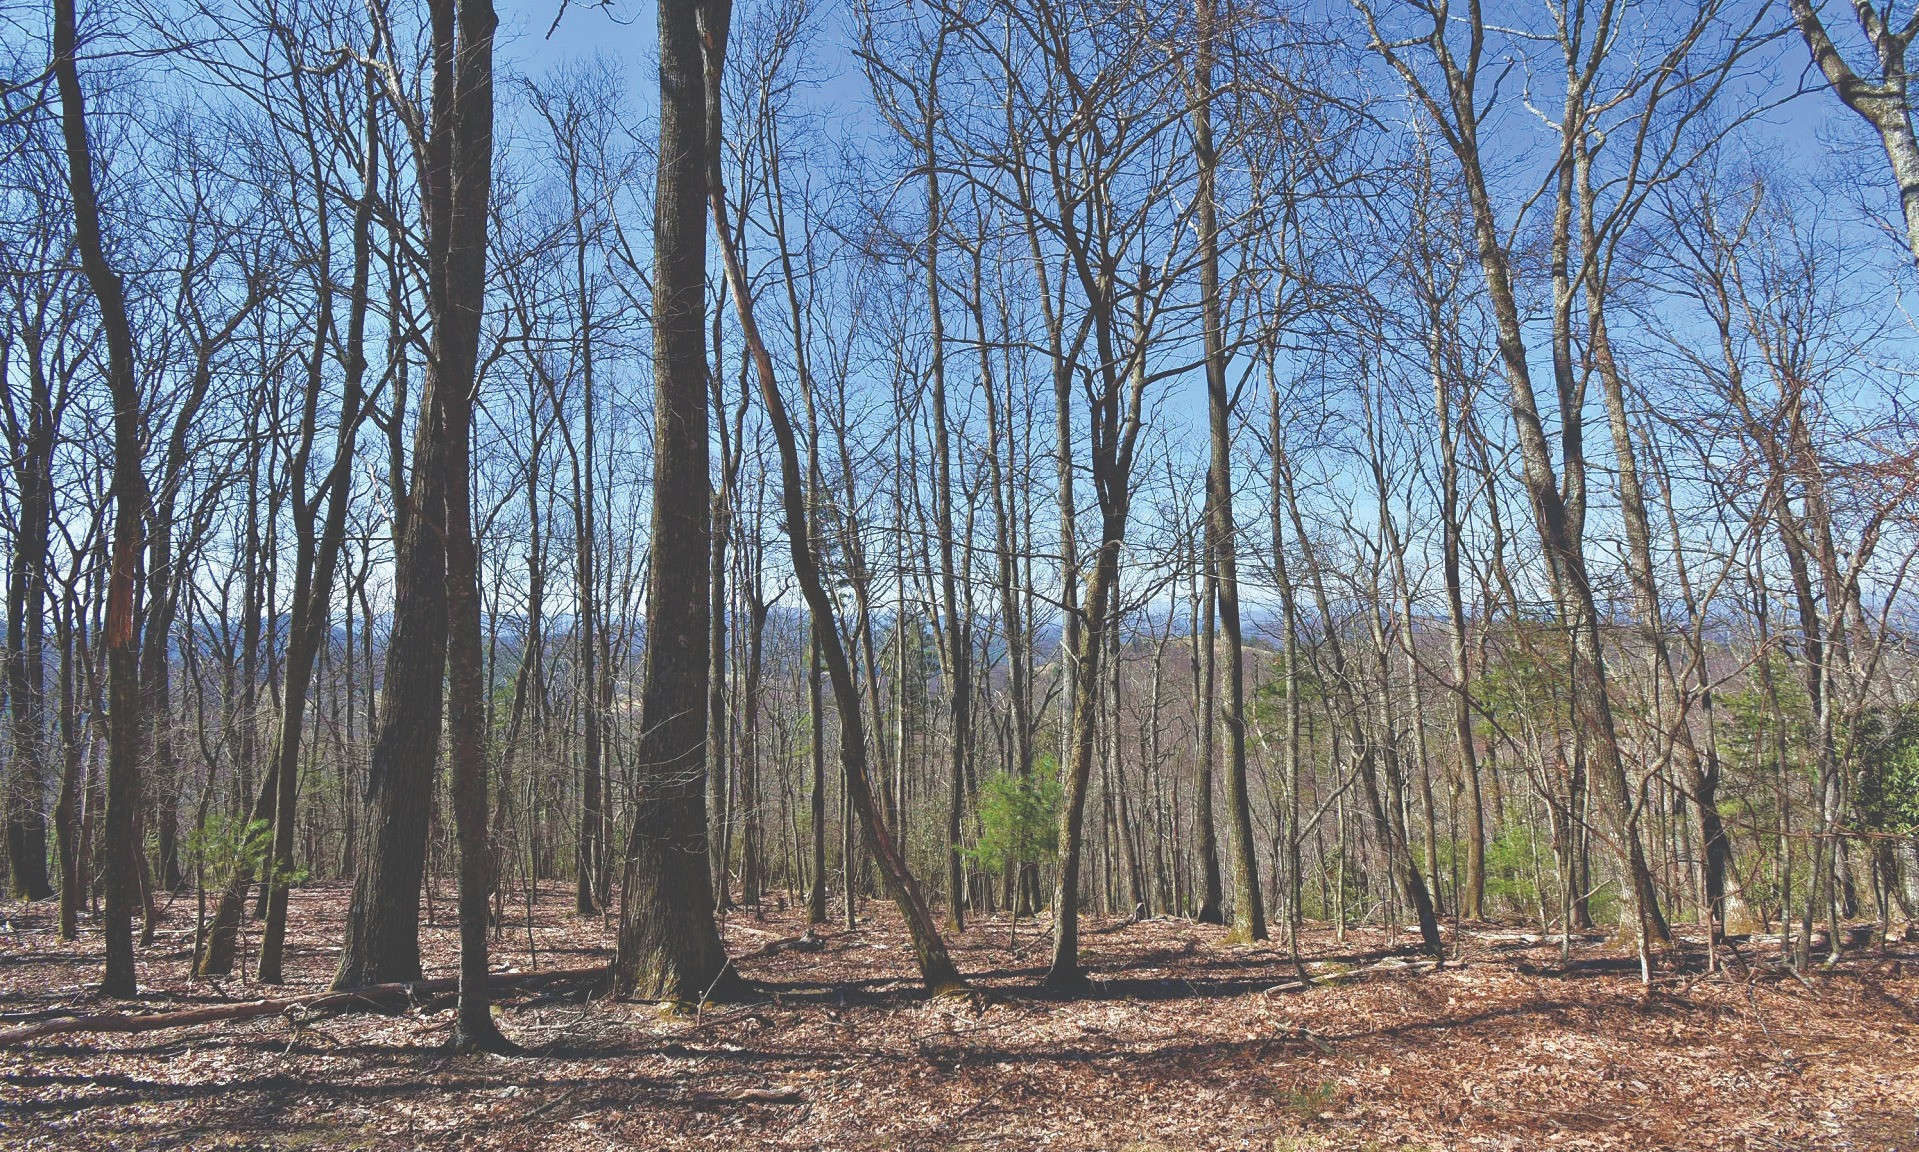 Parkway Estates is a quiet gated community located just off the Blue Ridge Parkway in the Laurel Springs area of Ashe County. A beautiful place for your new mountain home or cabin.